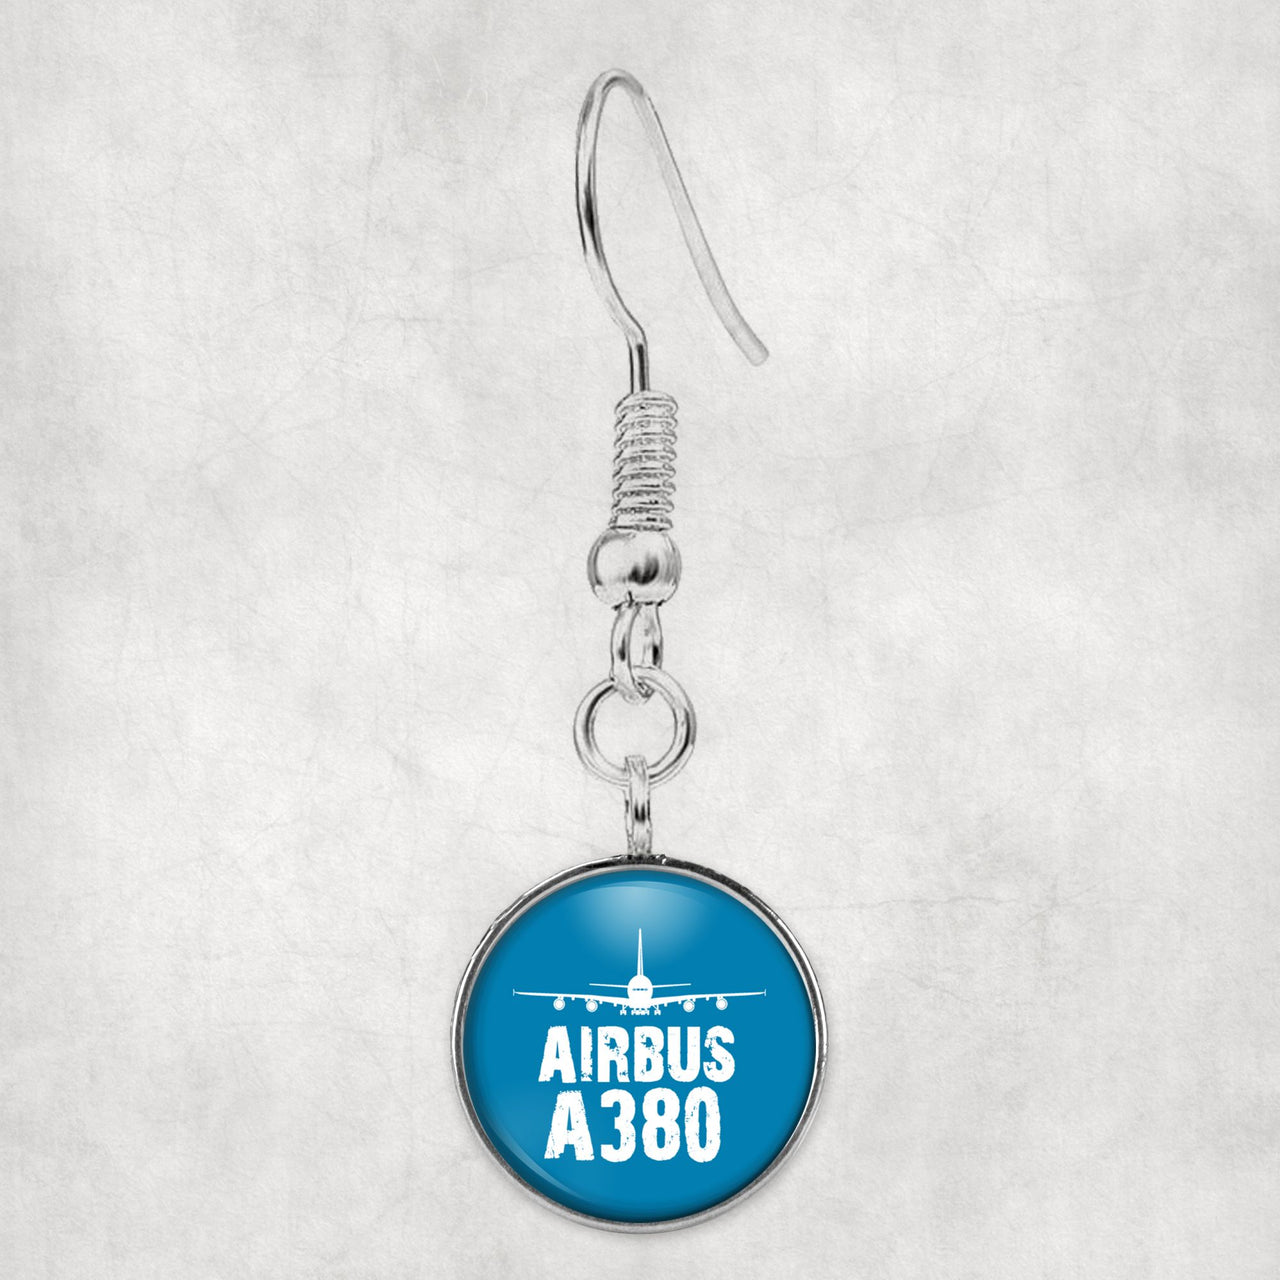 Airbus A380 & Plane Designed Earrings